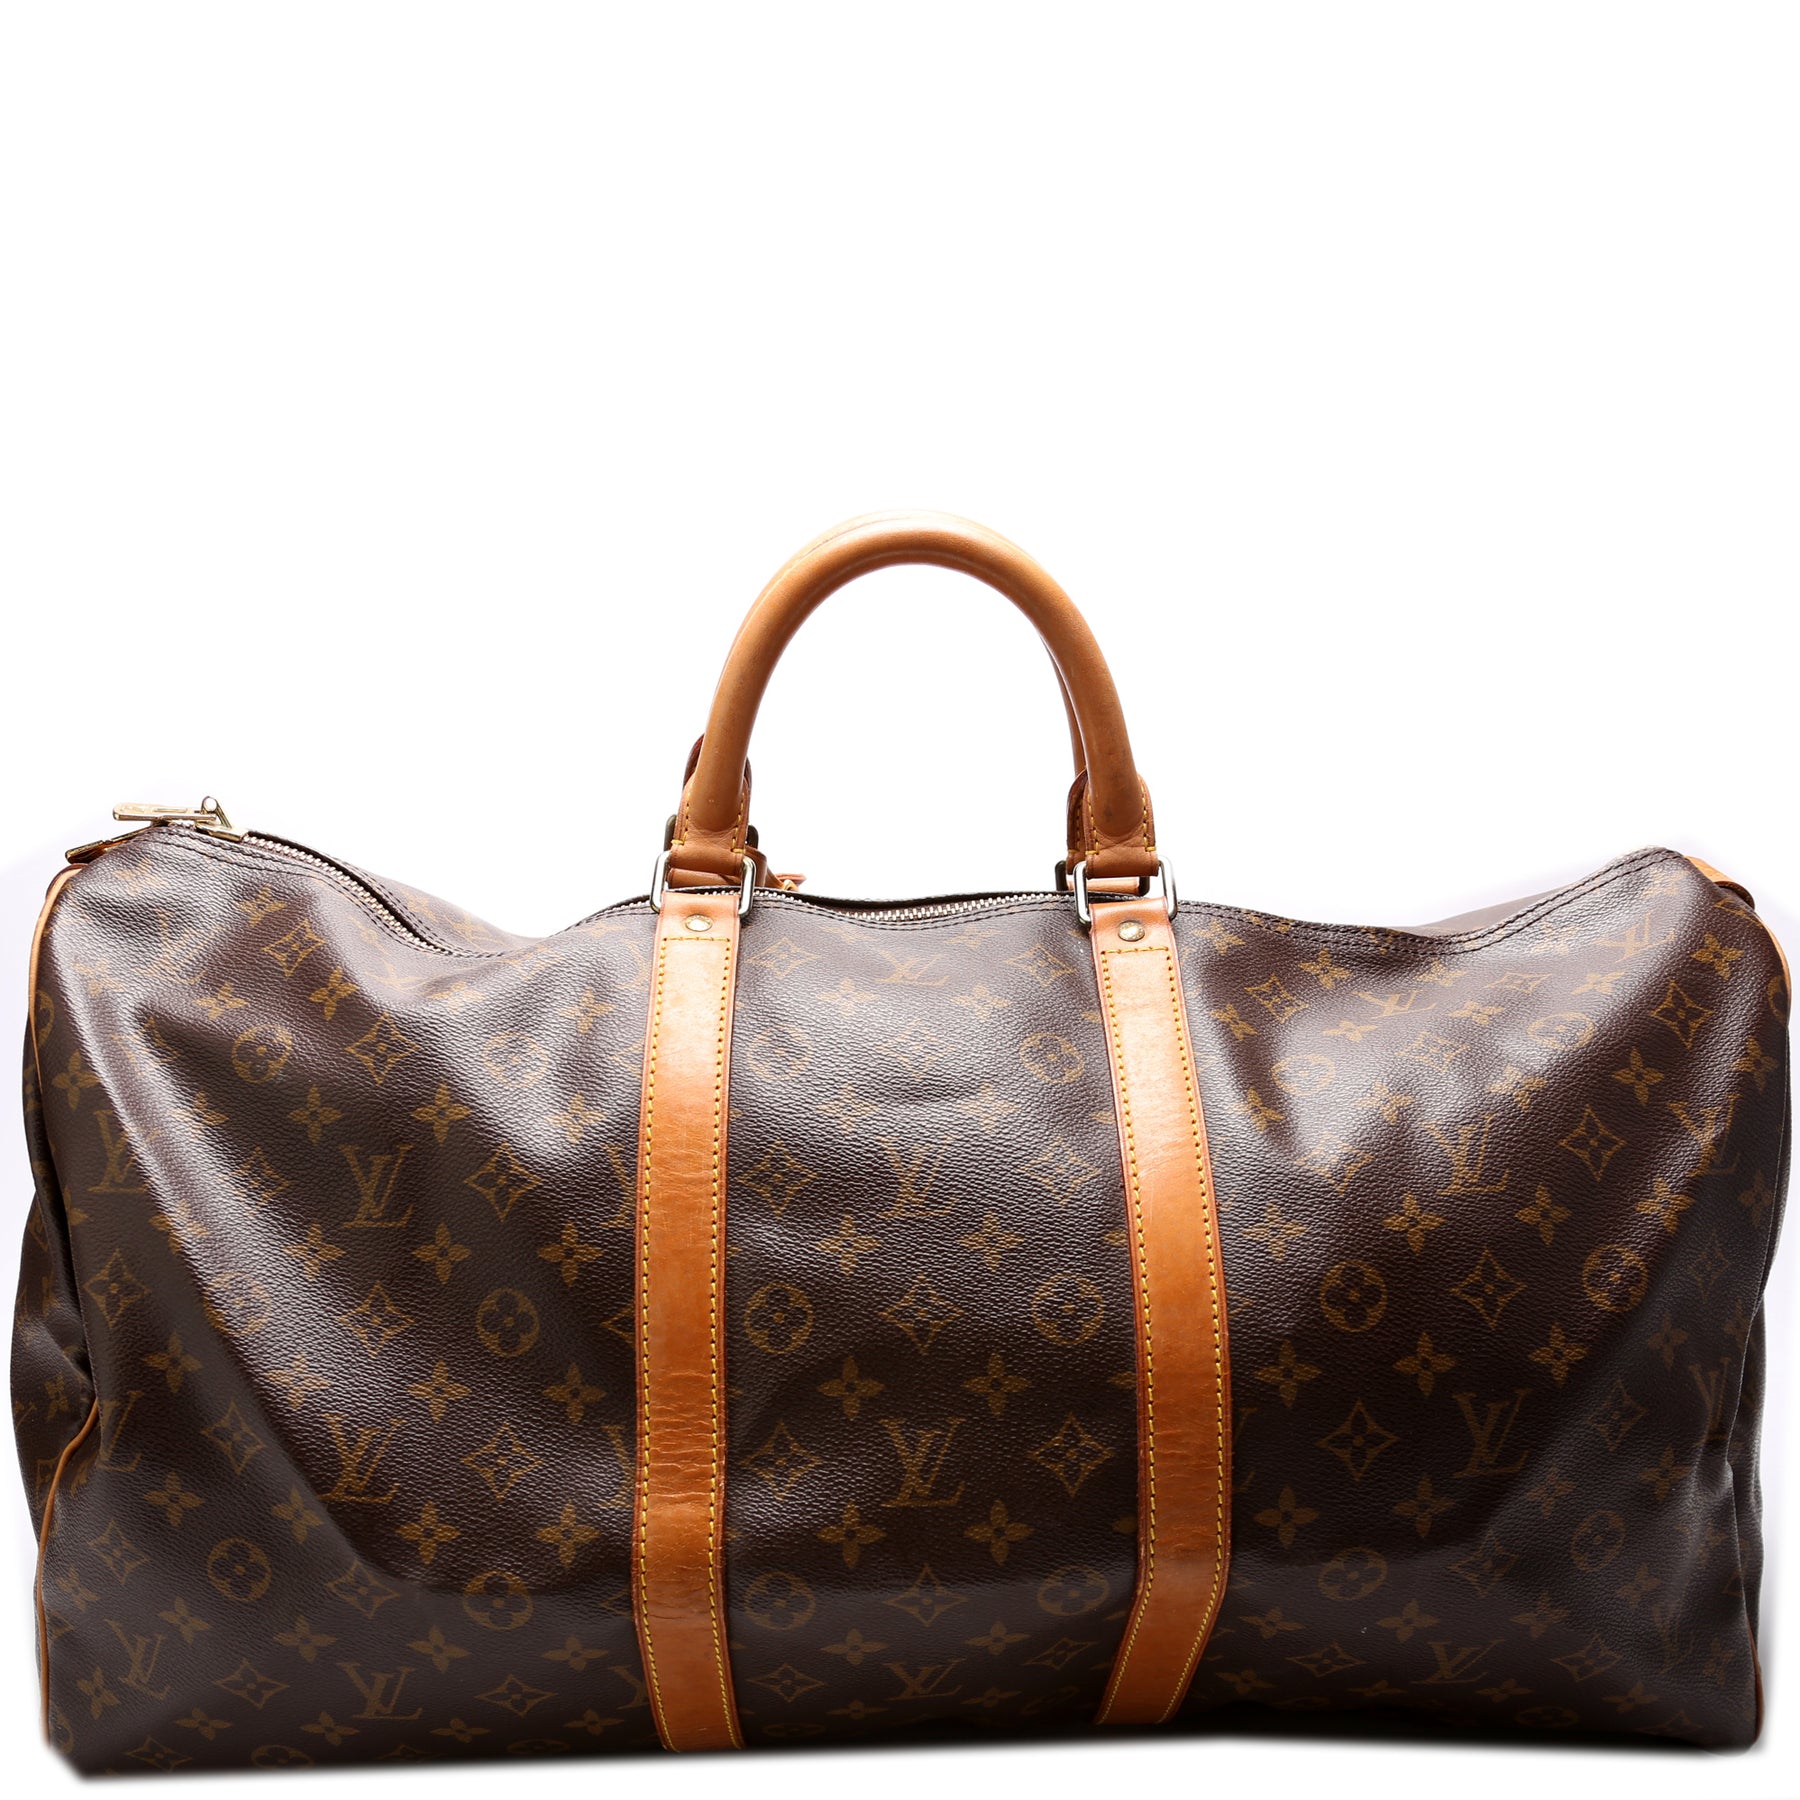 LOUIS VUITTON Keepall Bandouliere 55 Monogram without strap PRICE